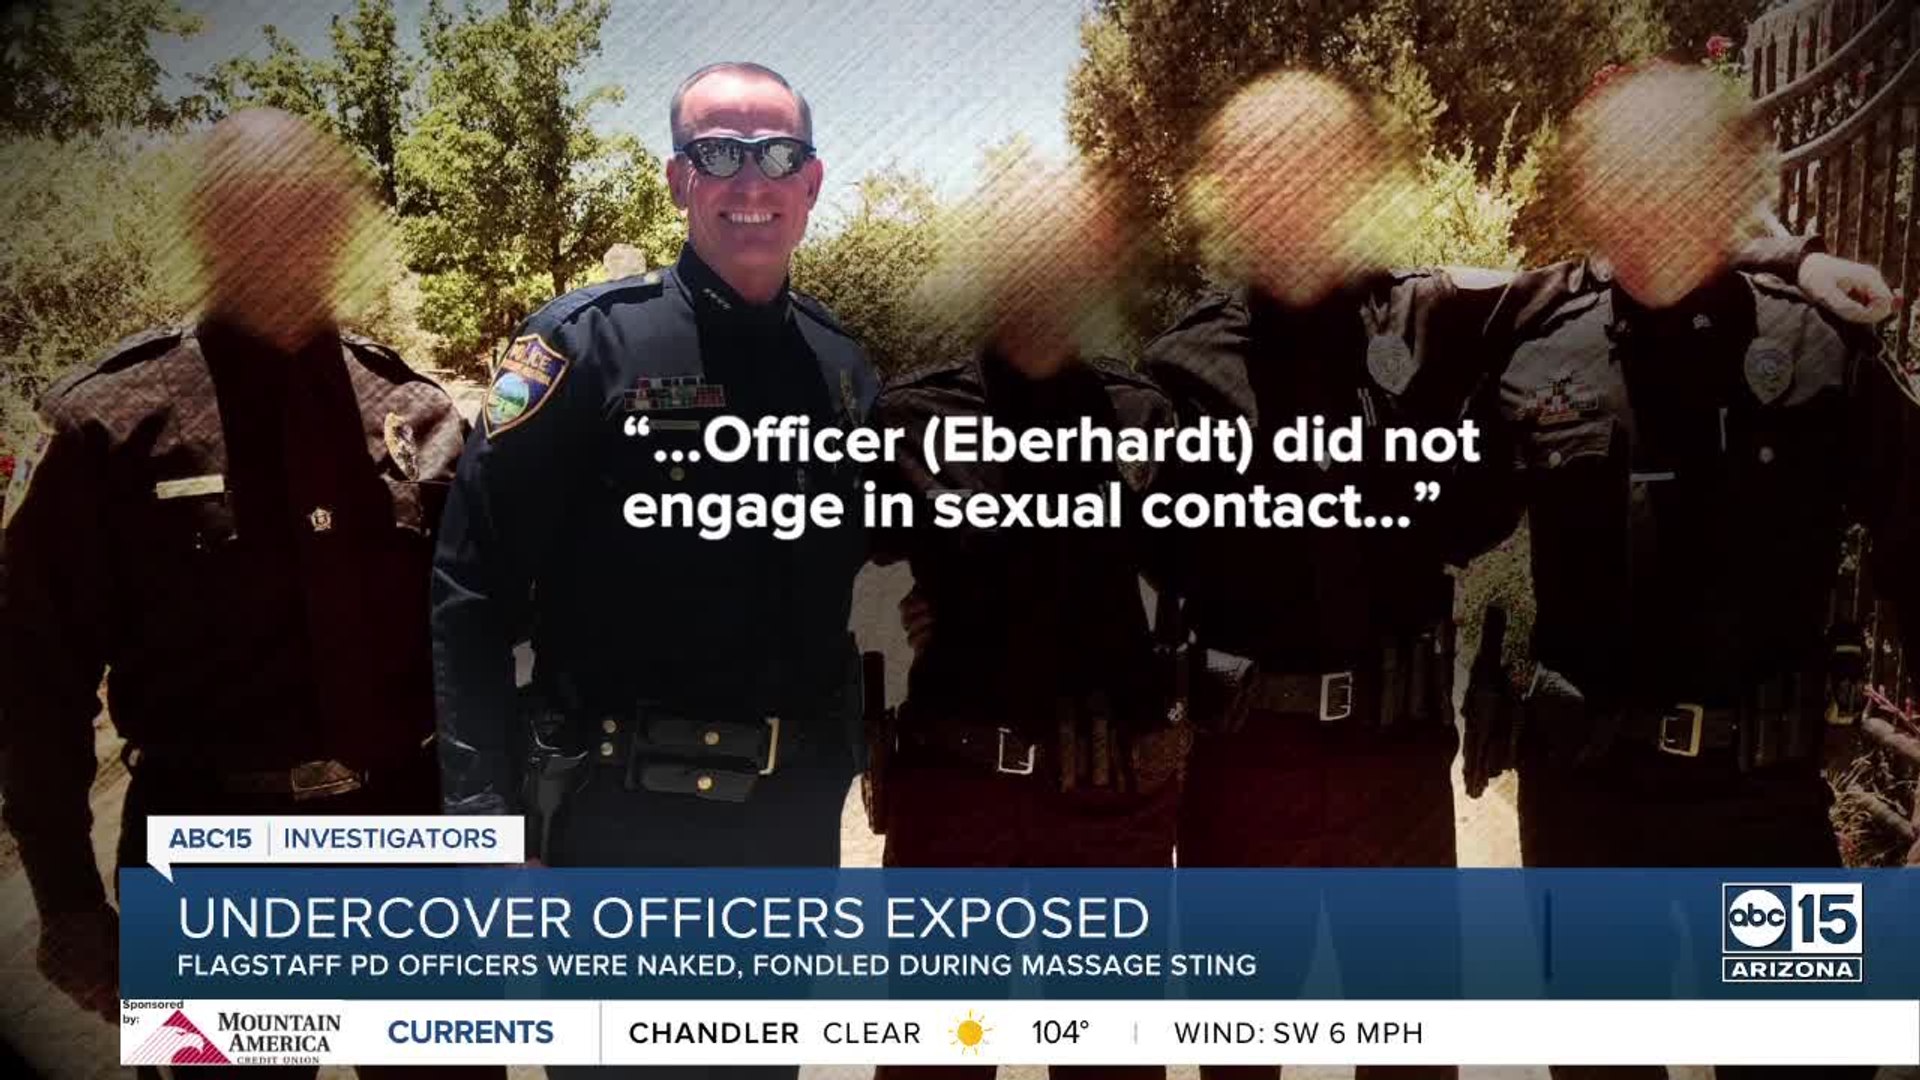 Flagstaff PD officers fully naked, fondled during massage investigation picture